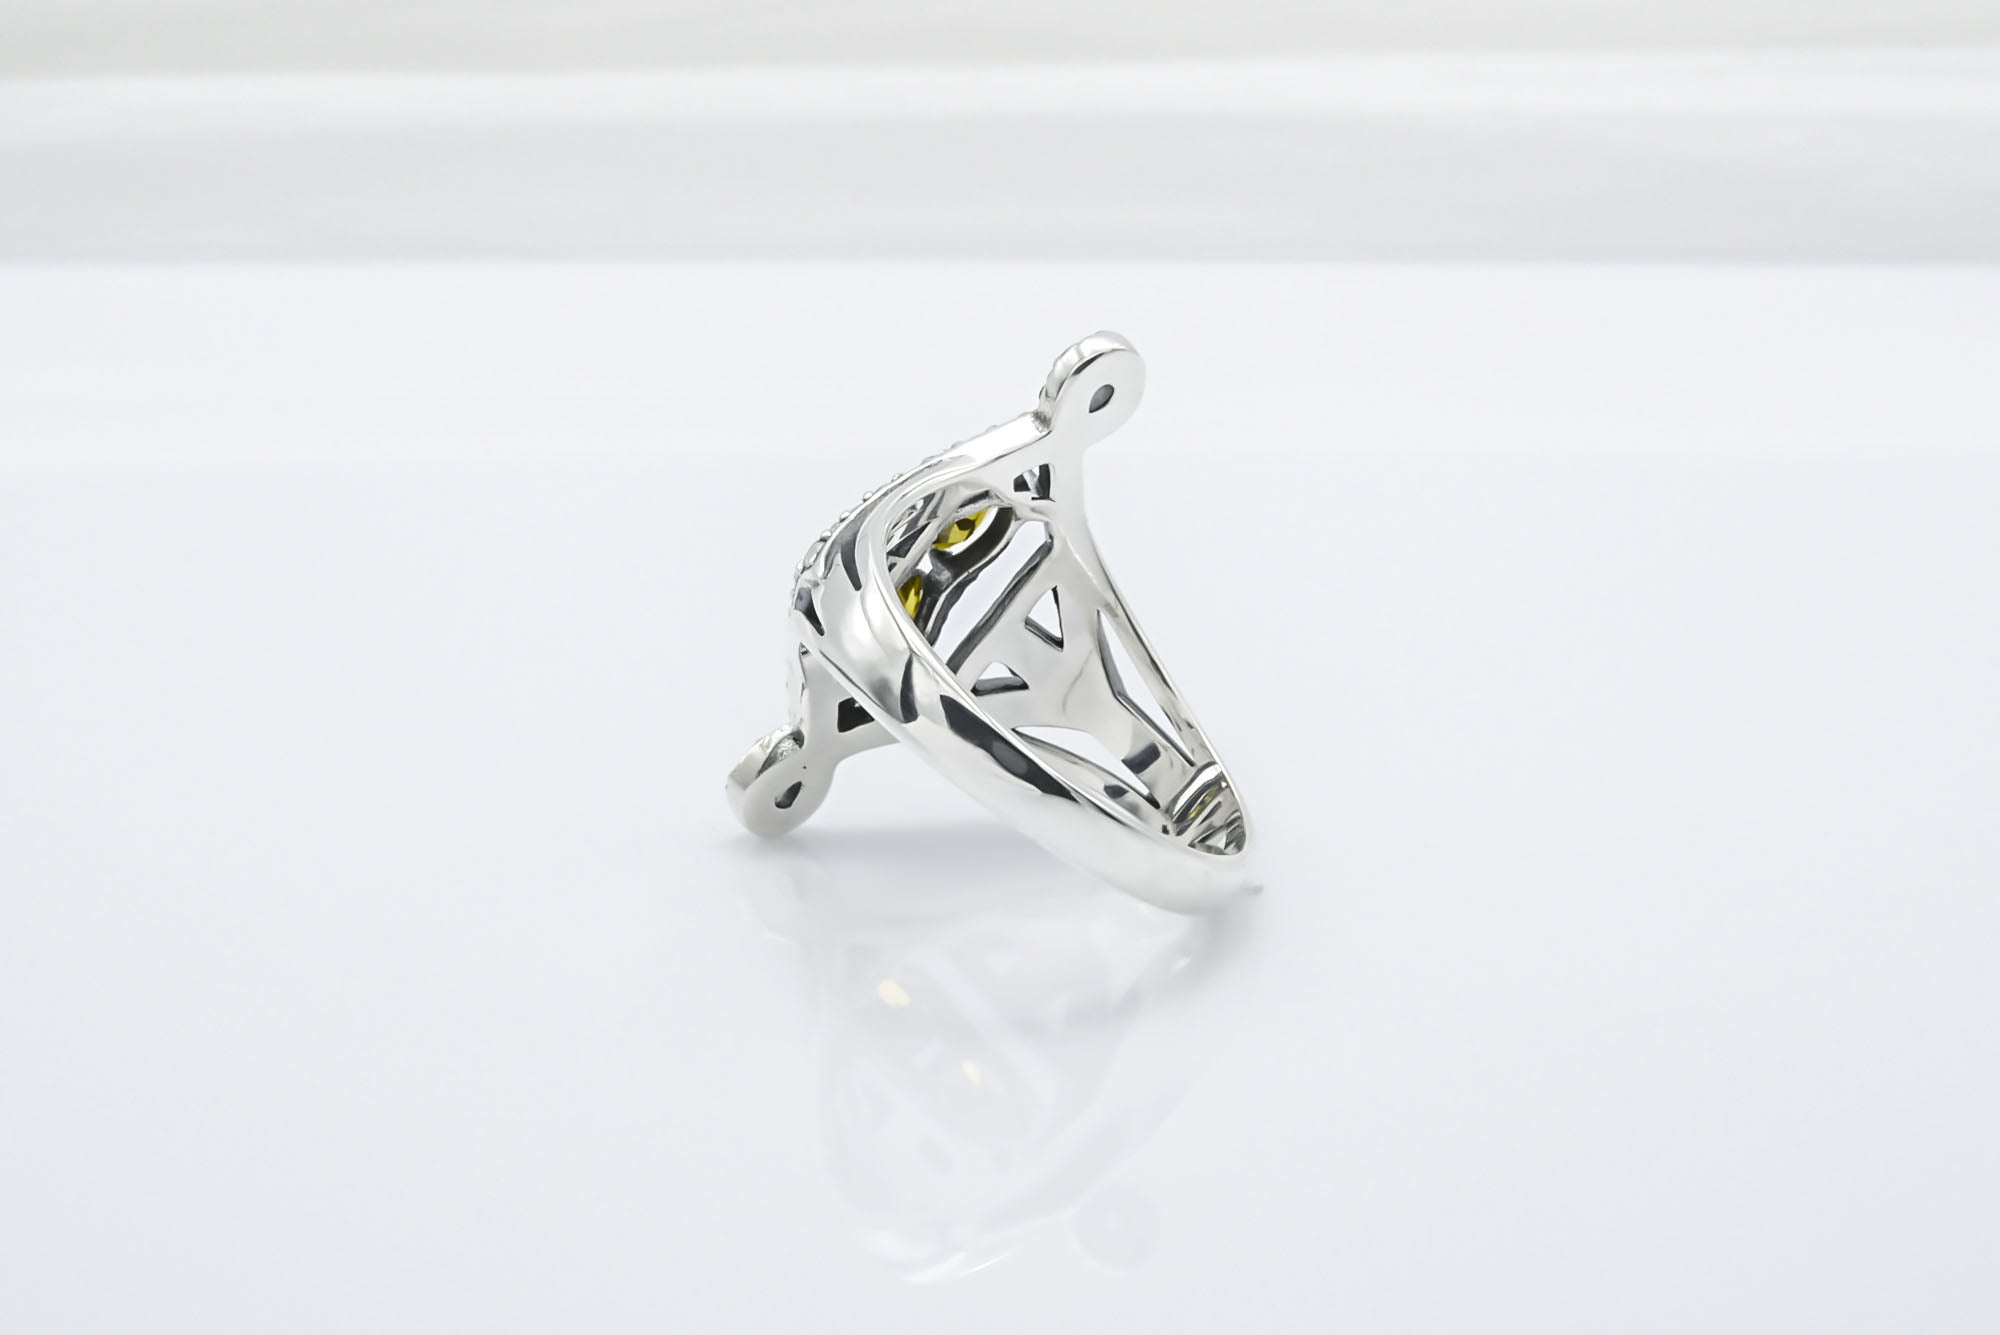 Sterling Silver Unique Ring with Yellow Gems, Handmade Classic Jewelry - vikingworkshop